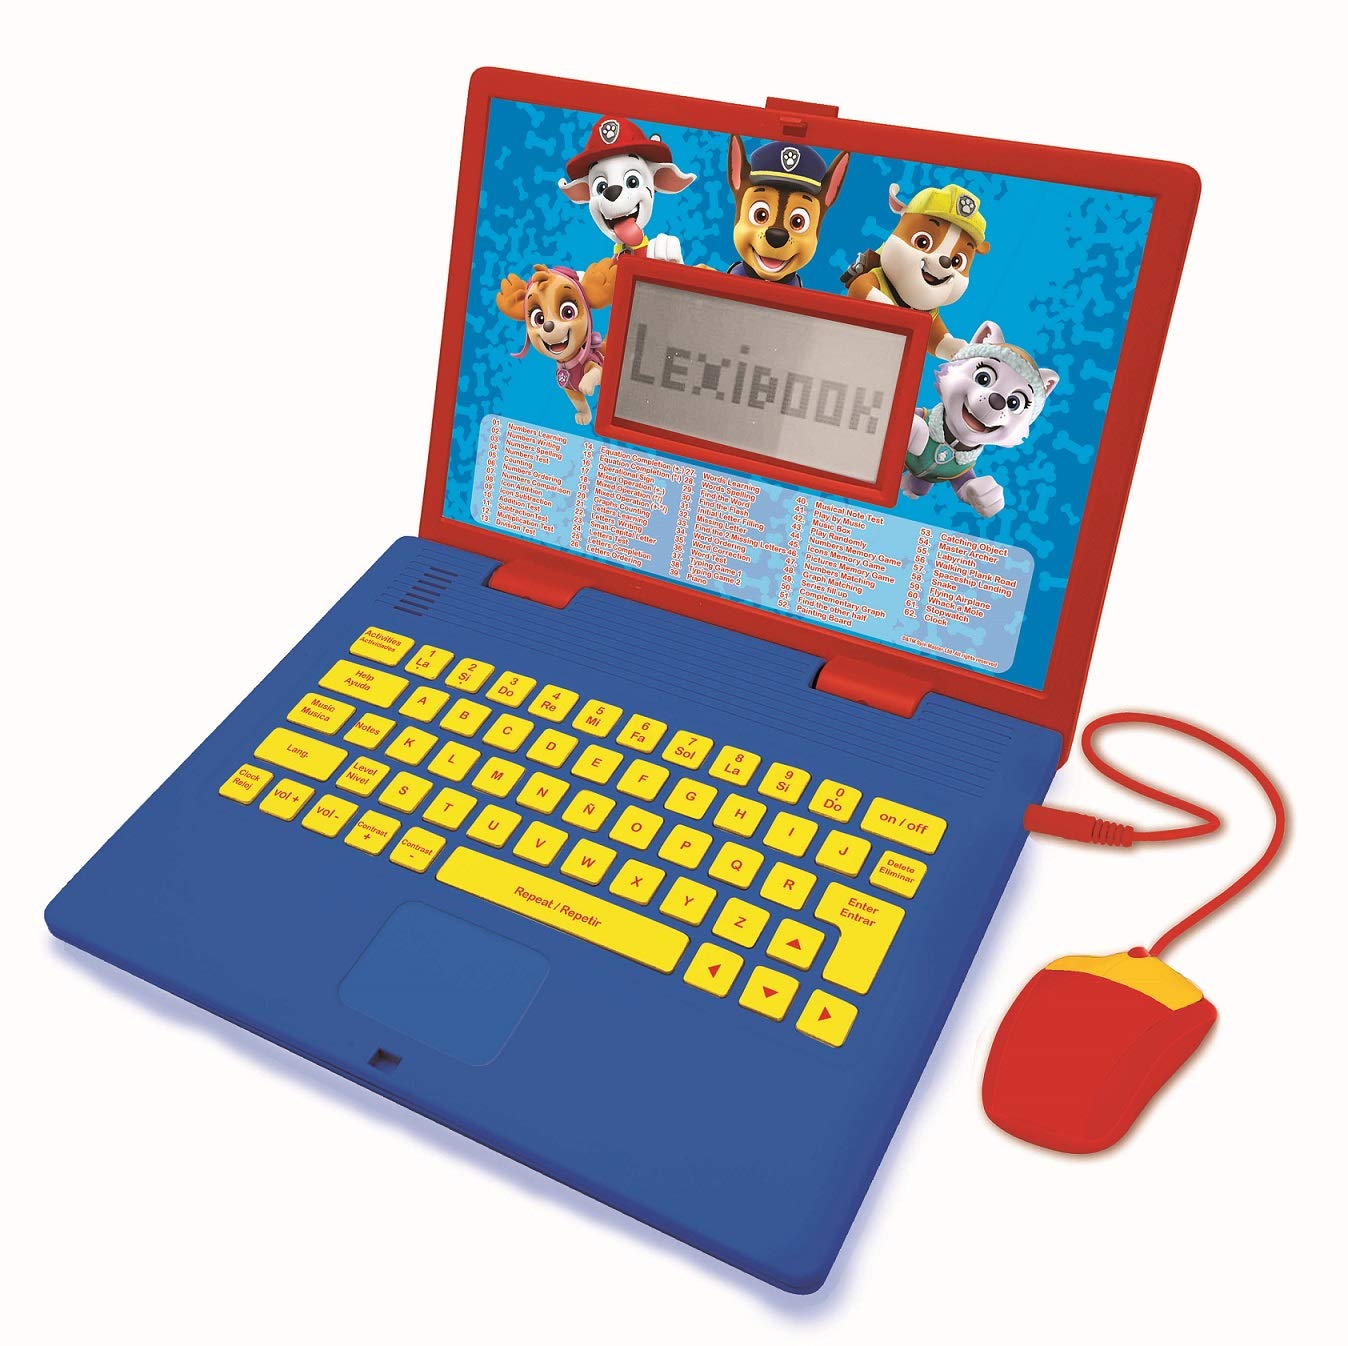 LEXiBOOK Paw Patrol - Educational and Bilingual Laptop Spanish/English - Toy for Child Kid (Boys & Girls) 124 Activities, Learn Play Games and Music with Chase Marshall - Red/Blue JC598PAi2